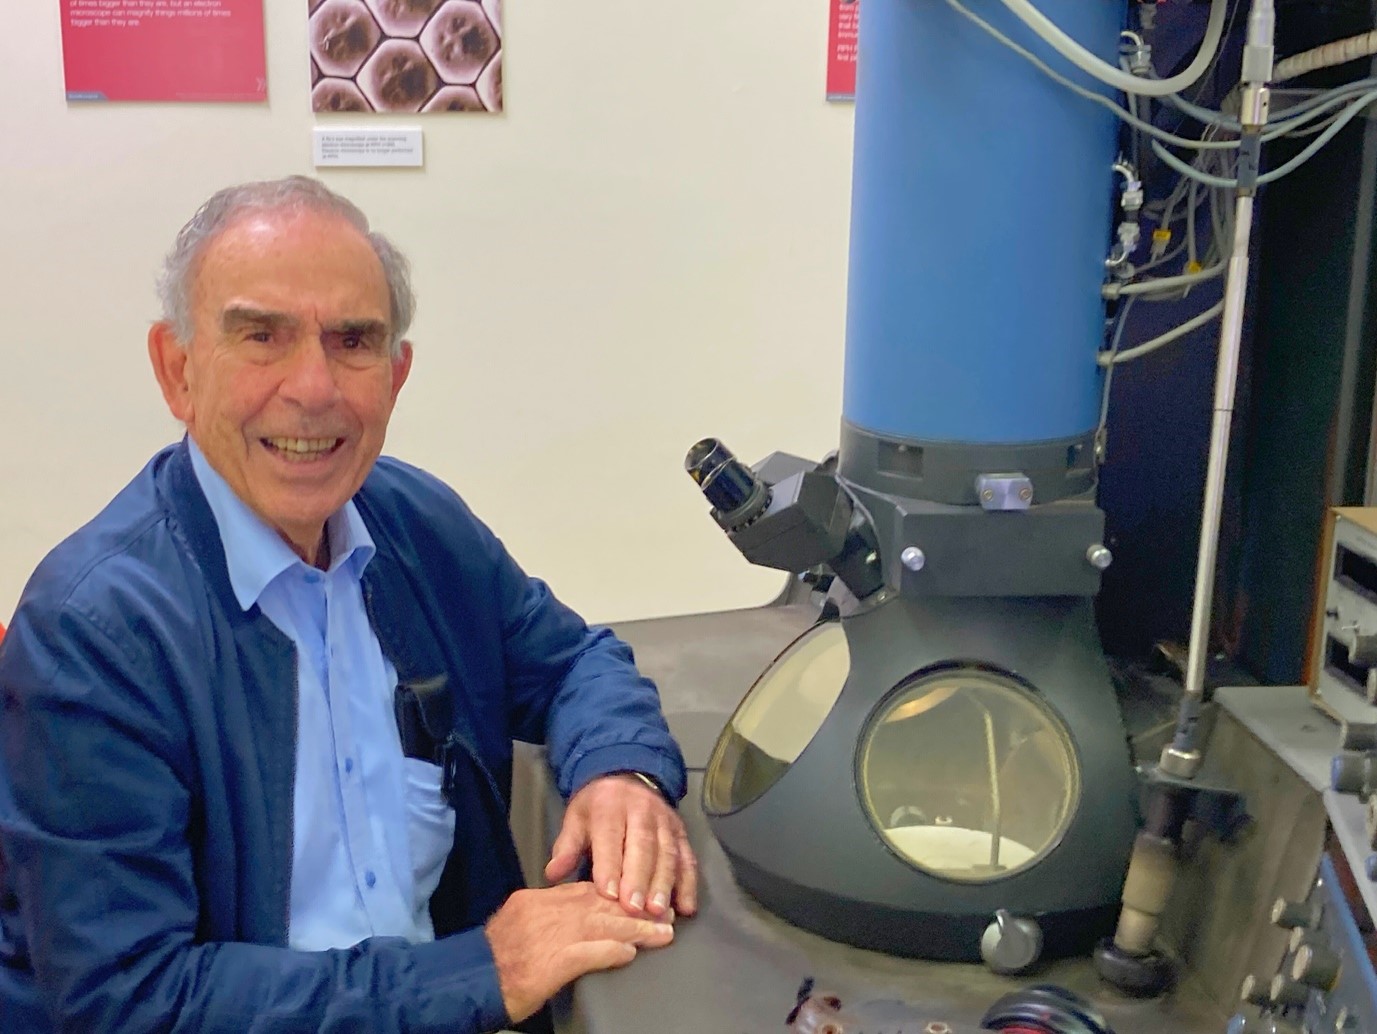 Photograph of Professor John Papadimitriou who worked on the microscope and was visiting the TEM exhibit.  